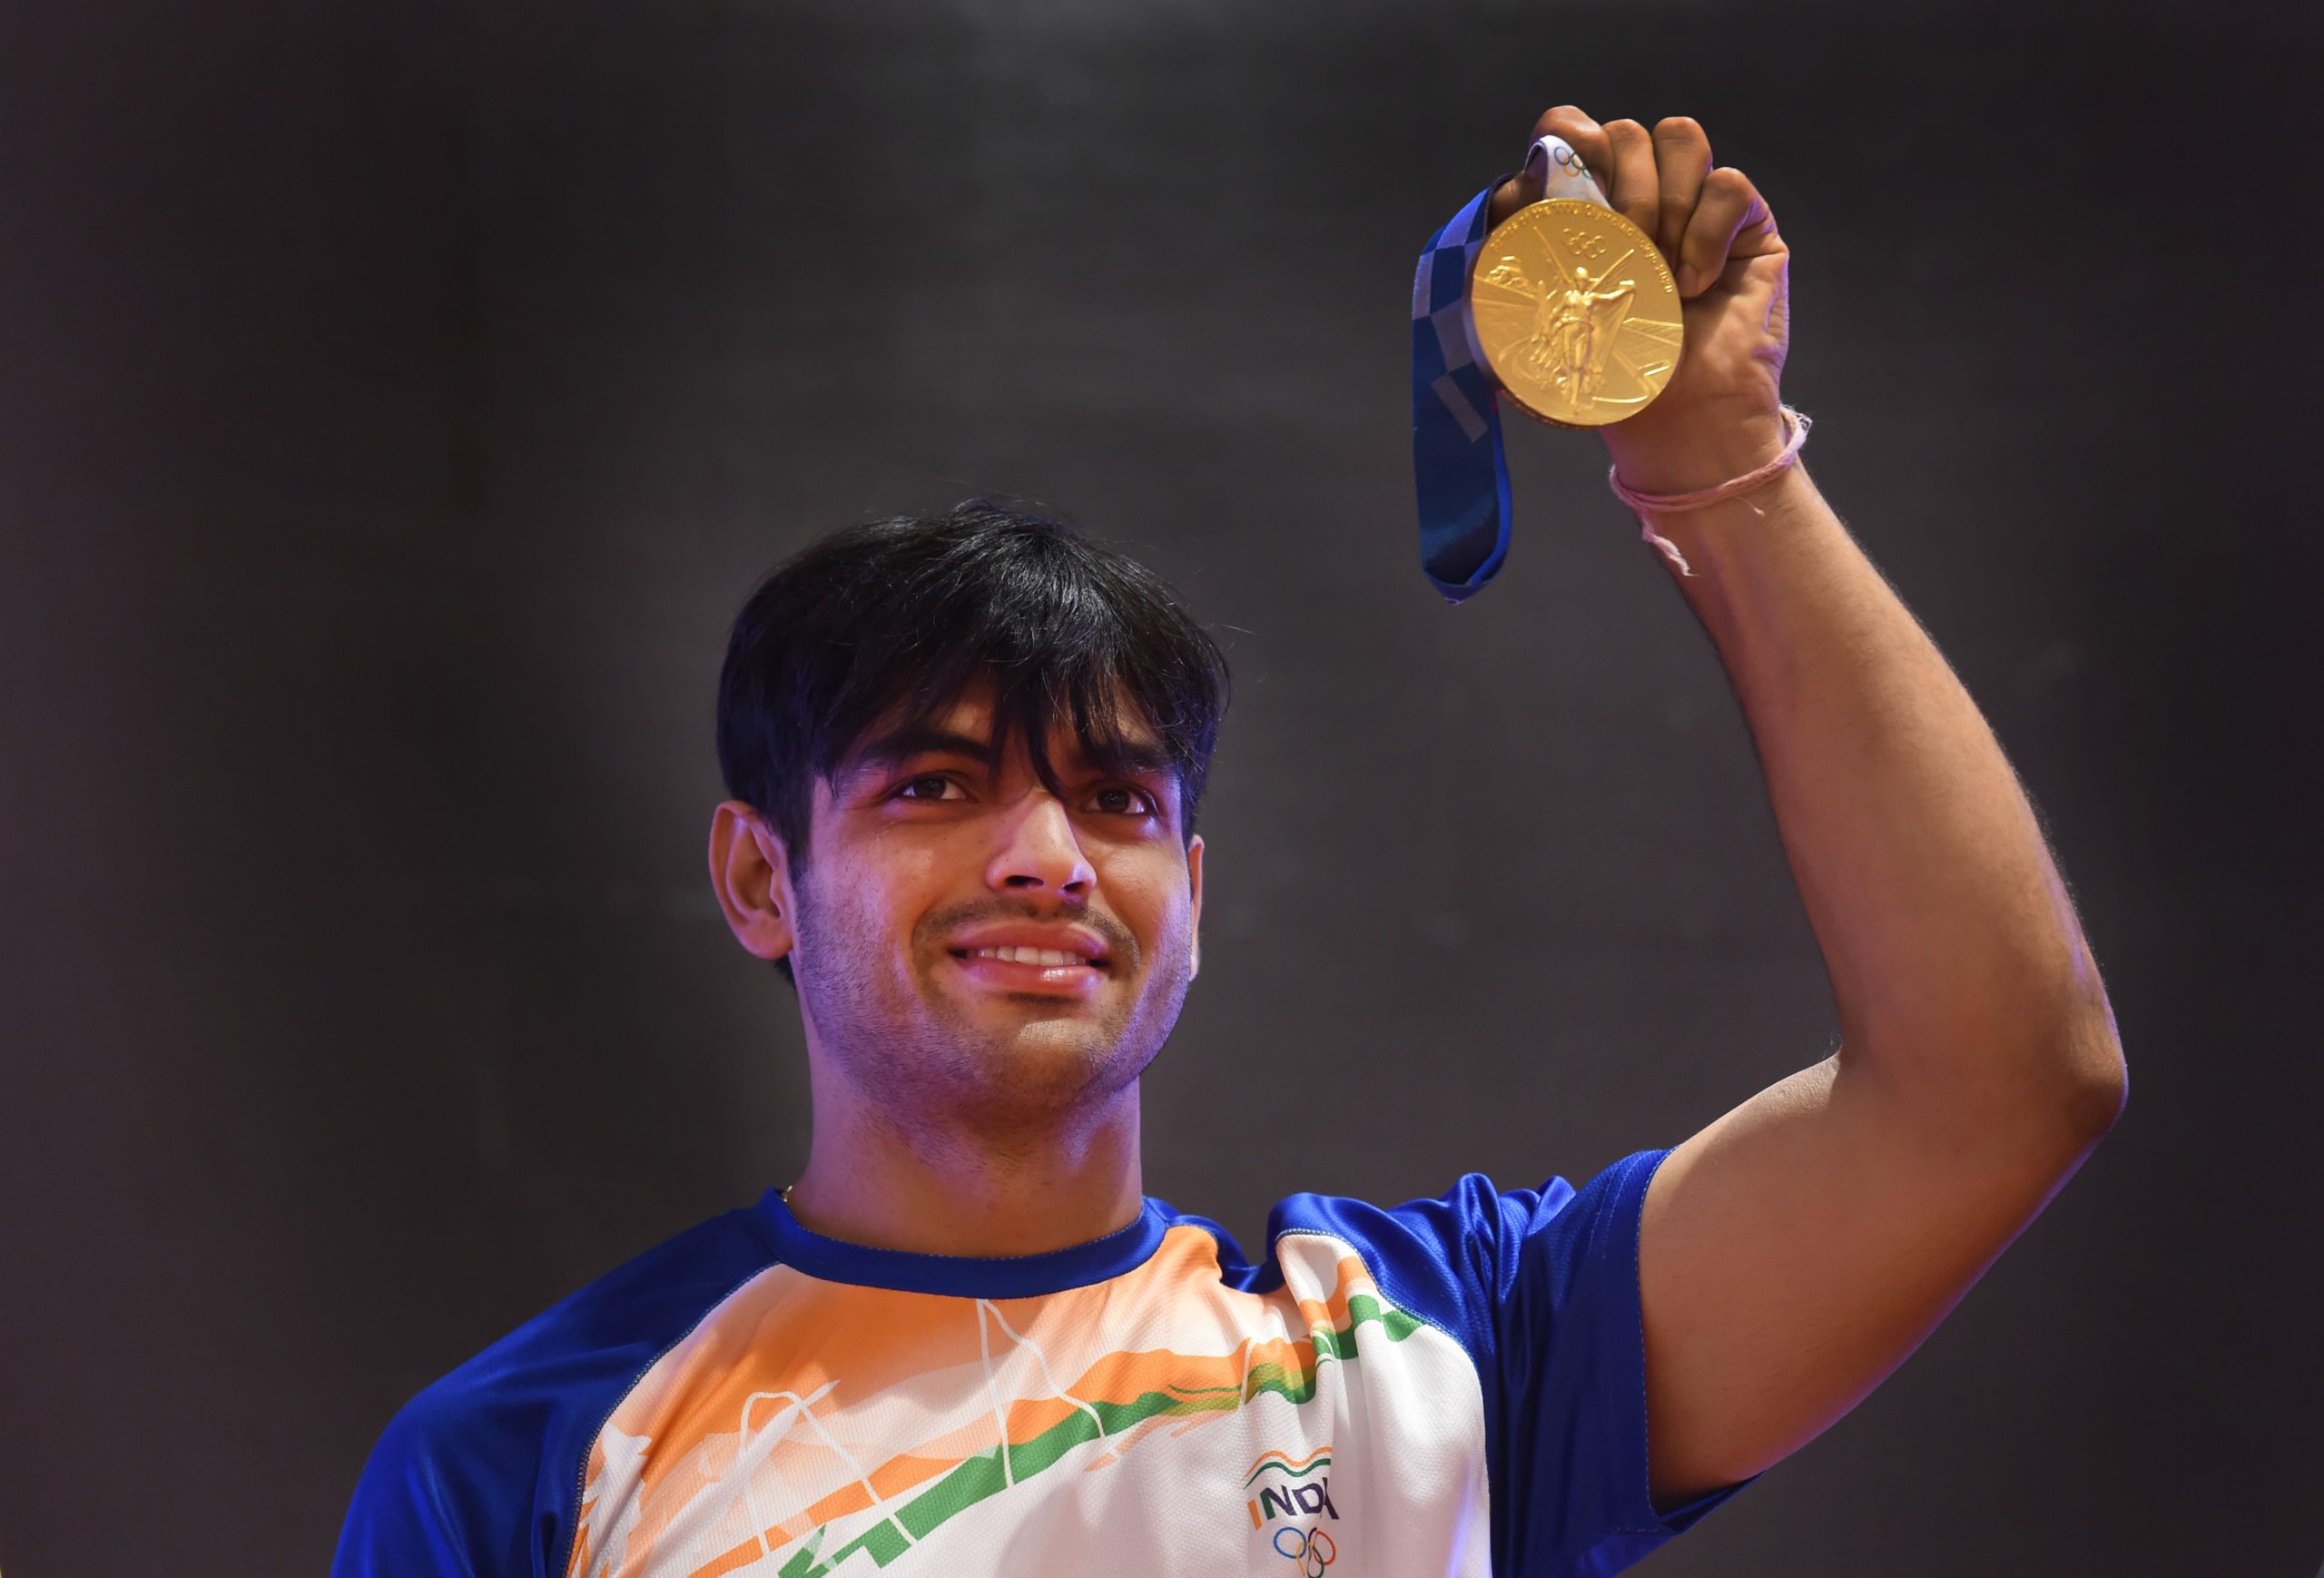 Neeraj Chopra jumps to 2nd in javelin world rankings after Olympic gold